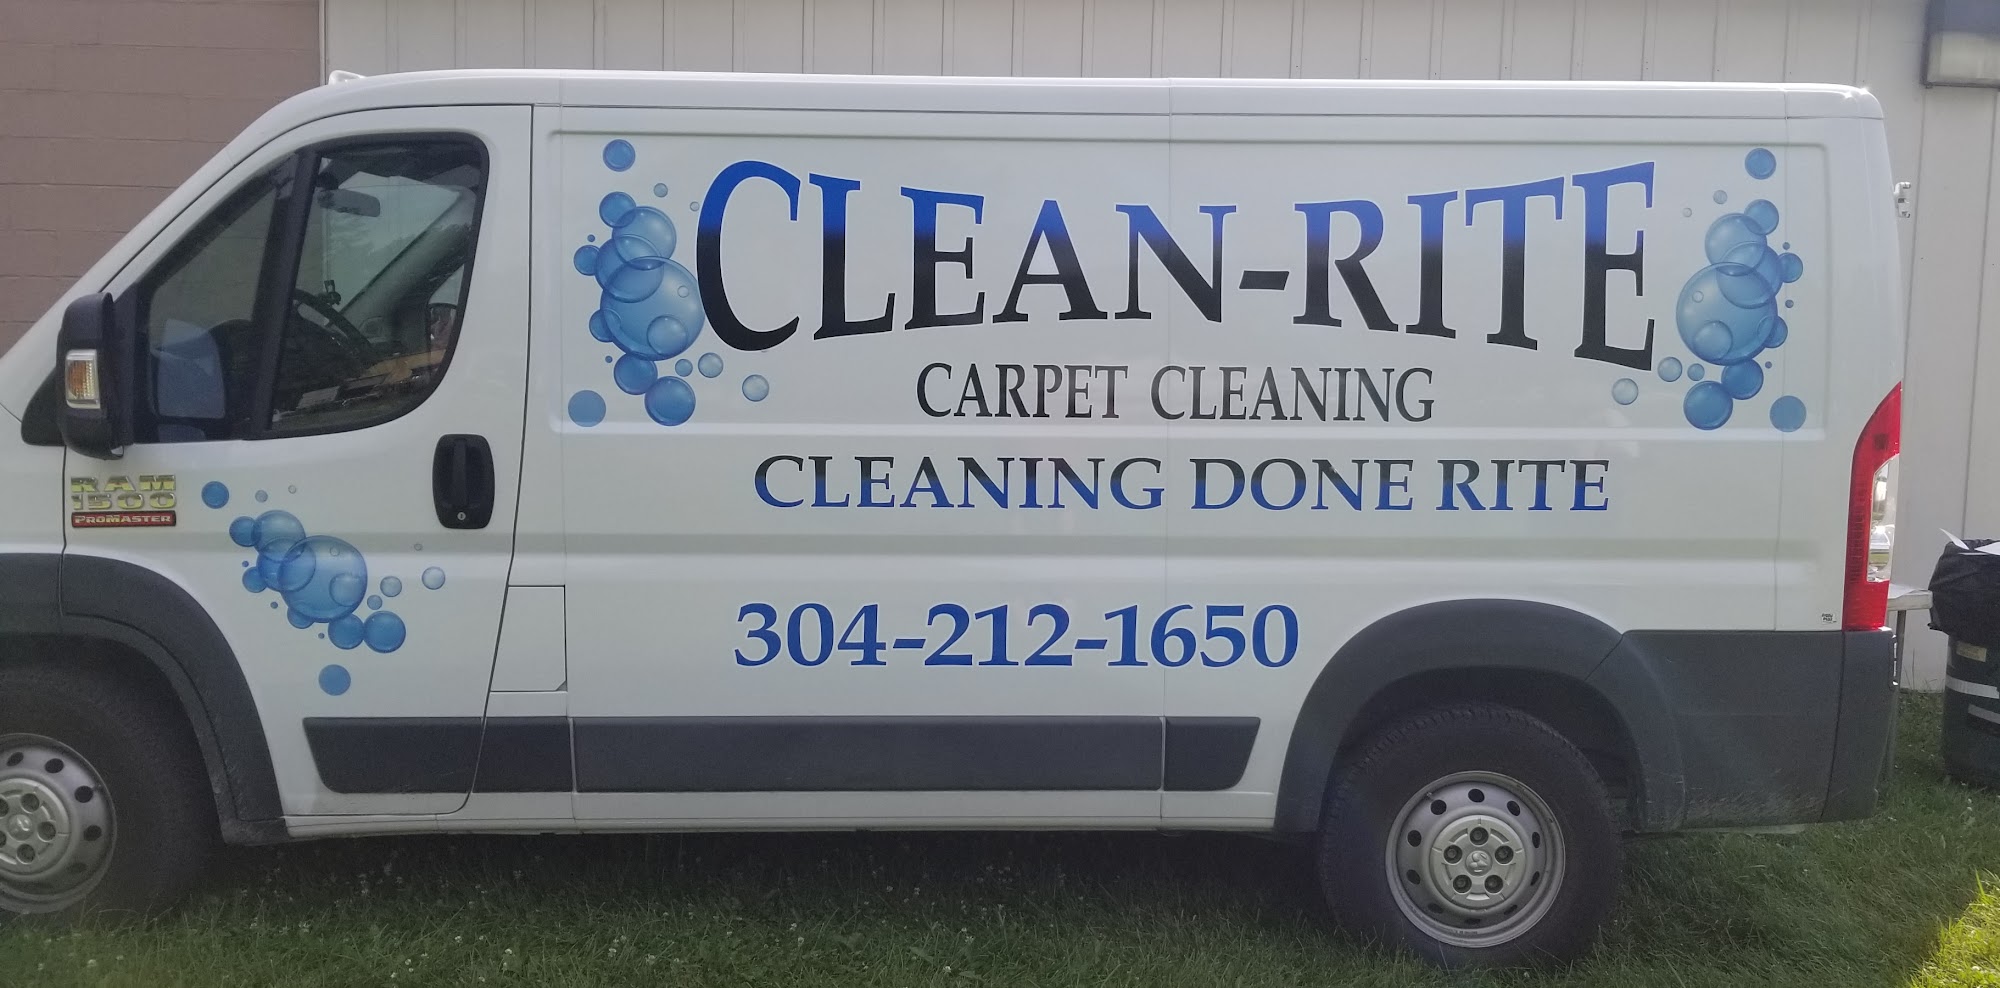 Clean-Rite Carpet Cleaning( formally Extreme Green Carpet Cleaning)